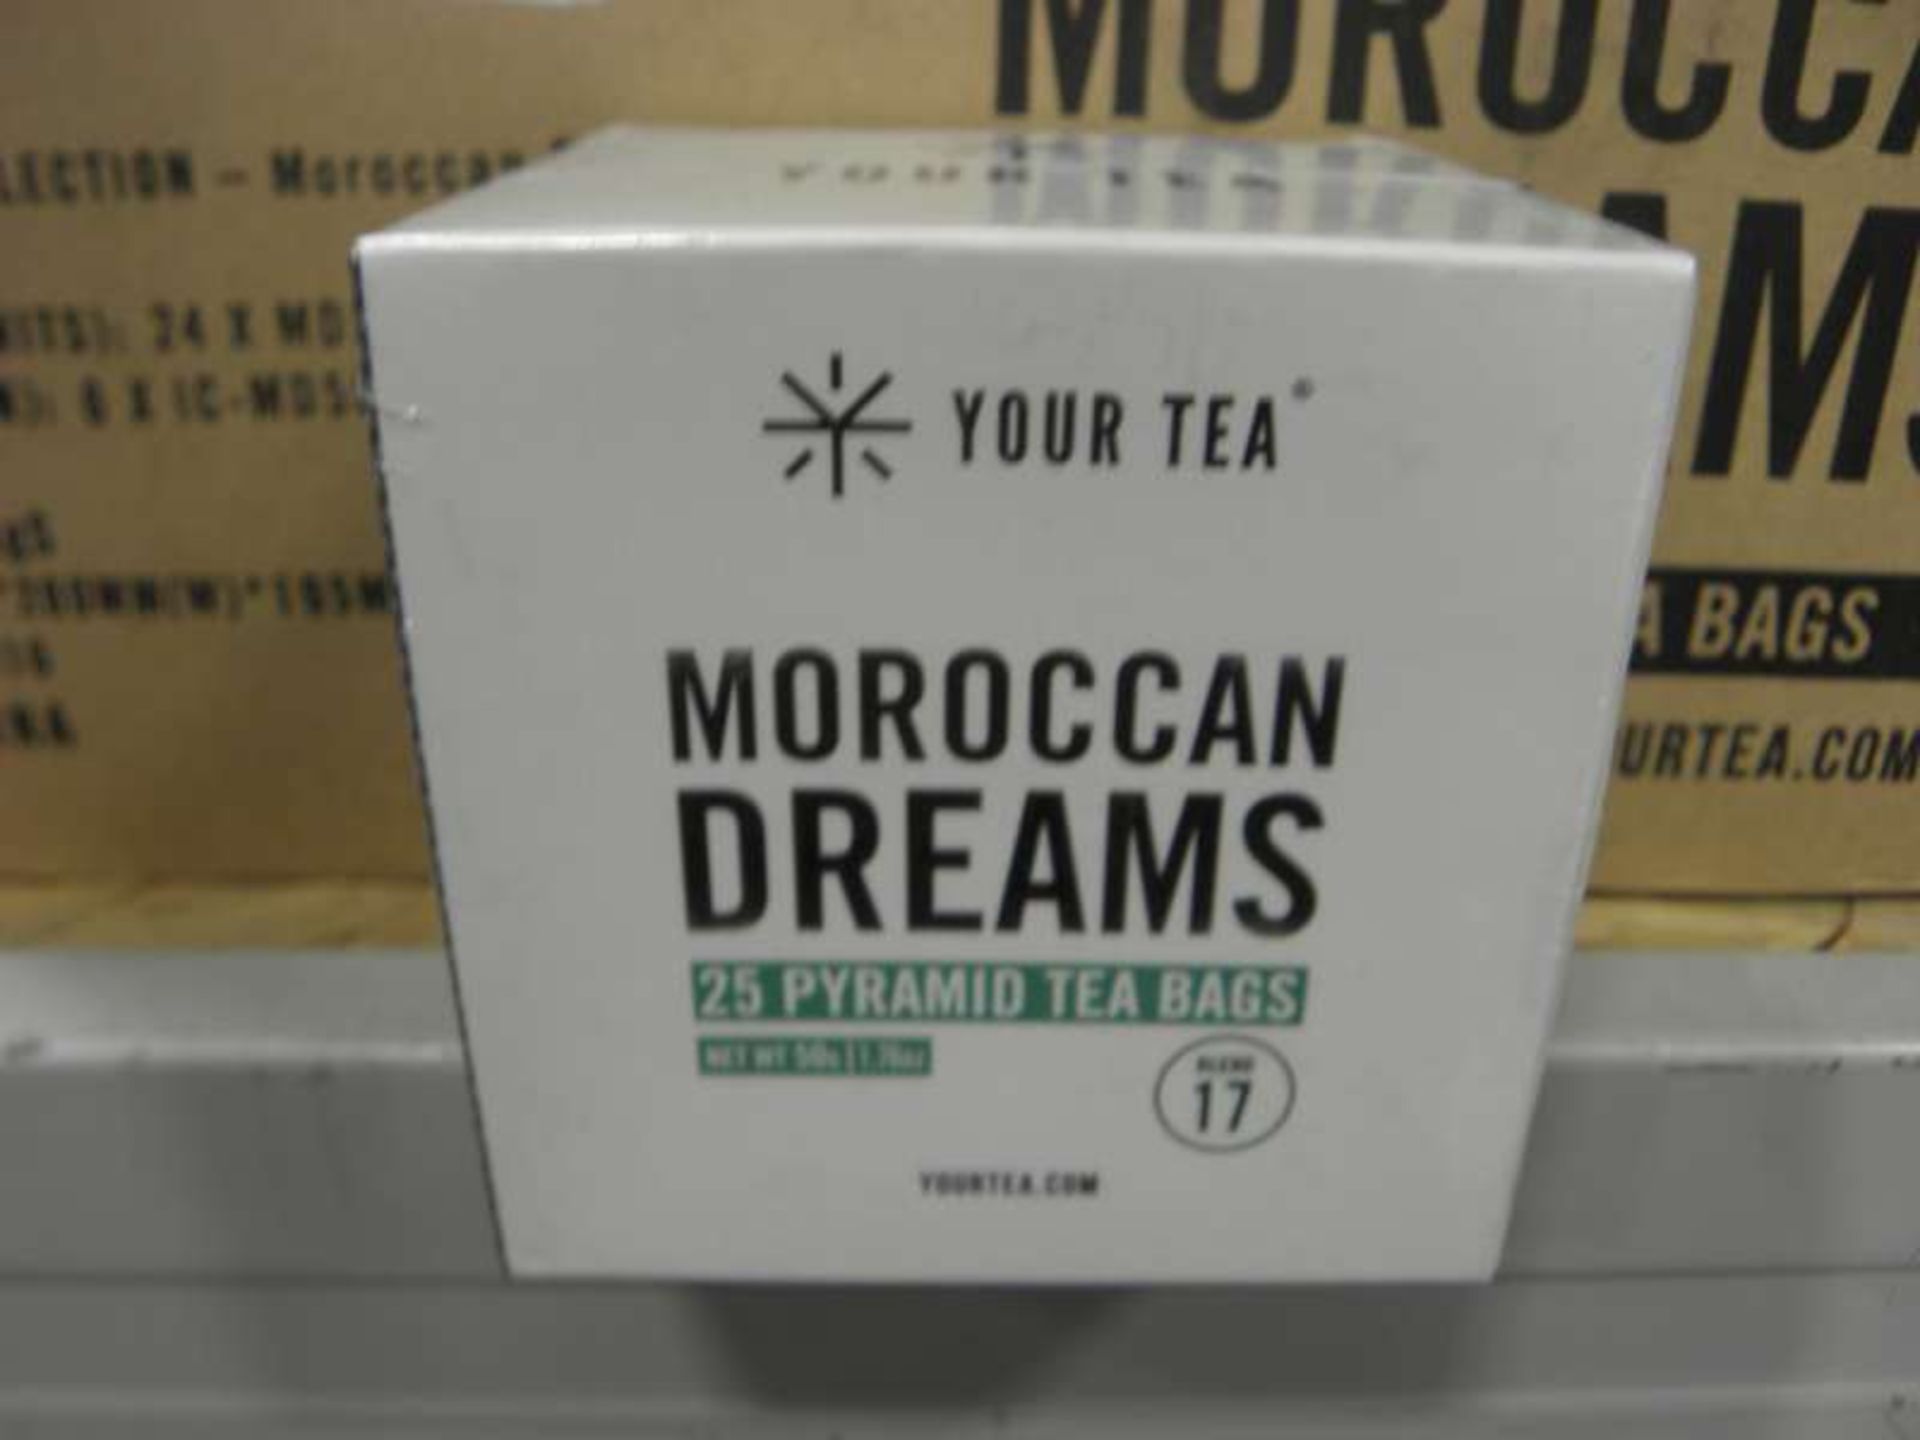 72 X BOXES OF 25 PYRAMID MOROCCAN DREAMS YOUR TEA TEABAGS IN 3 BOXES ( EXP 01/2019 )